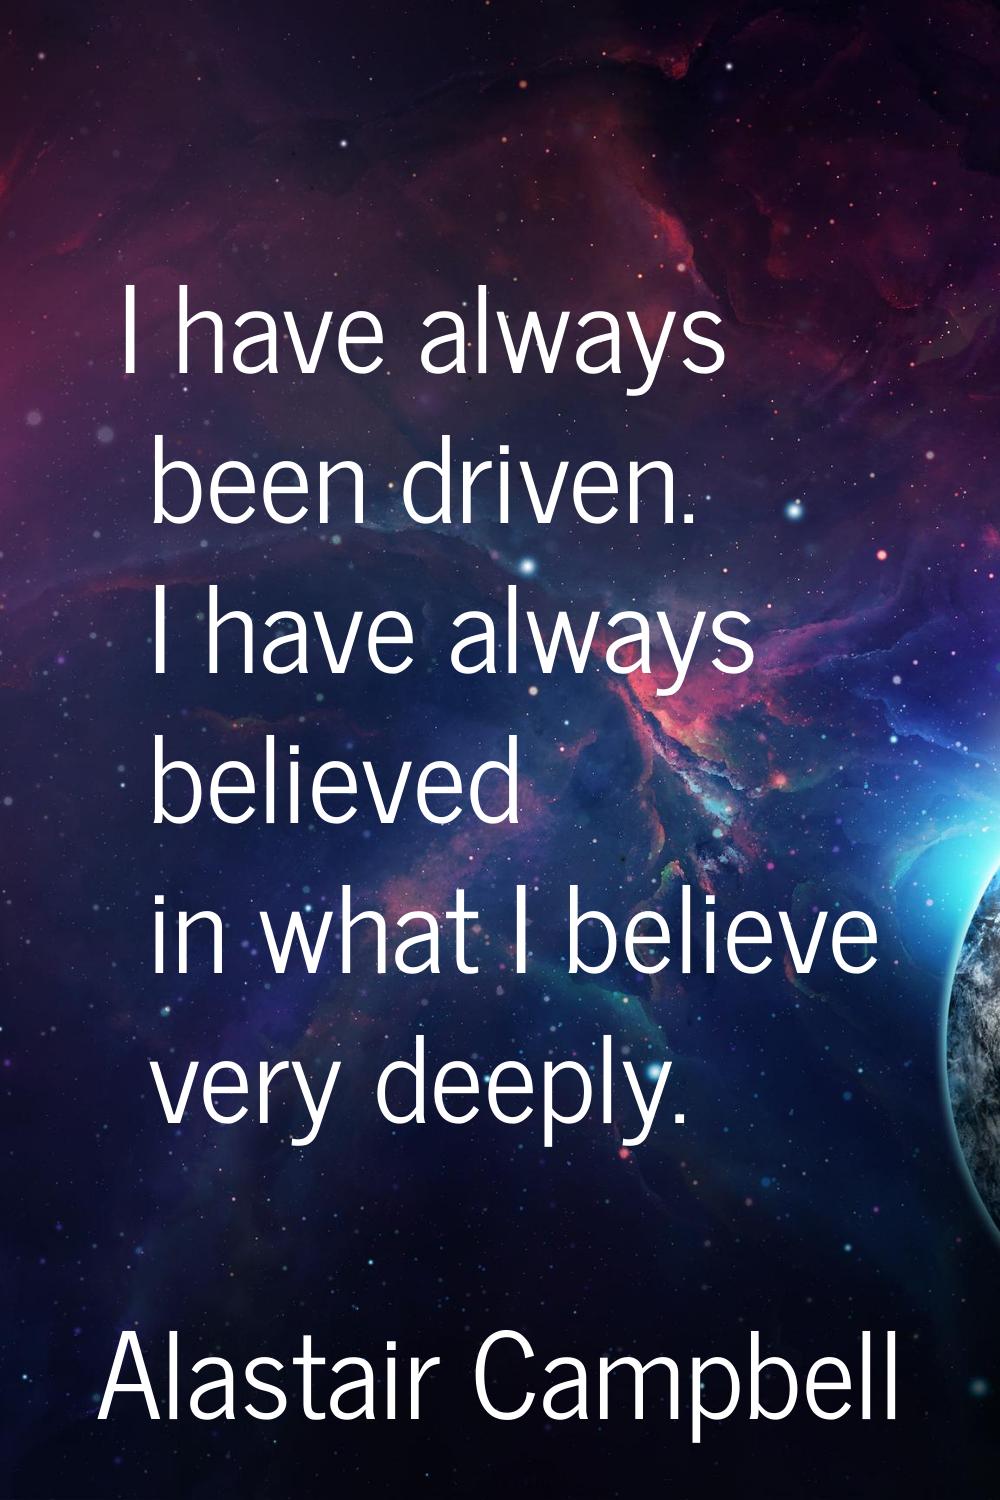 I have always been driven. I have always believed in what I believe very deeply.